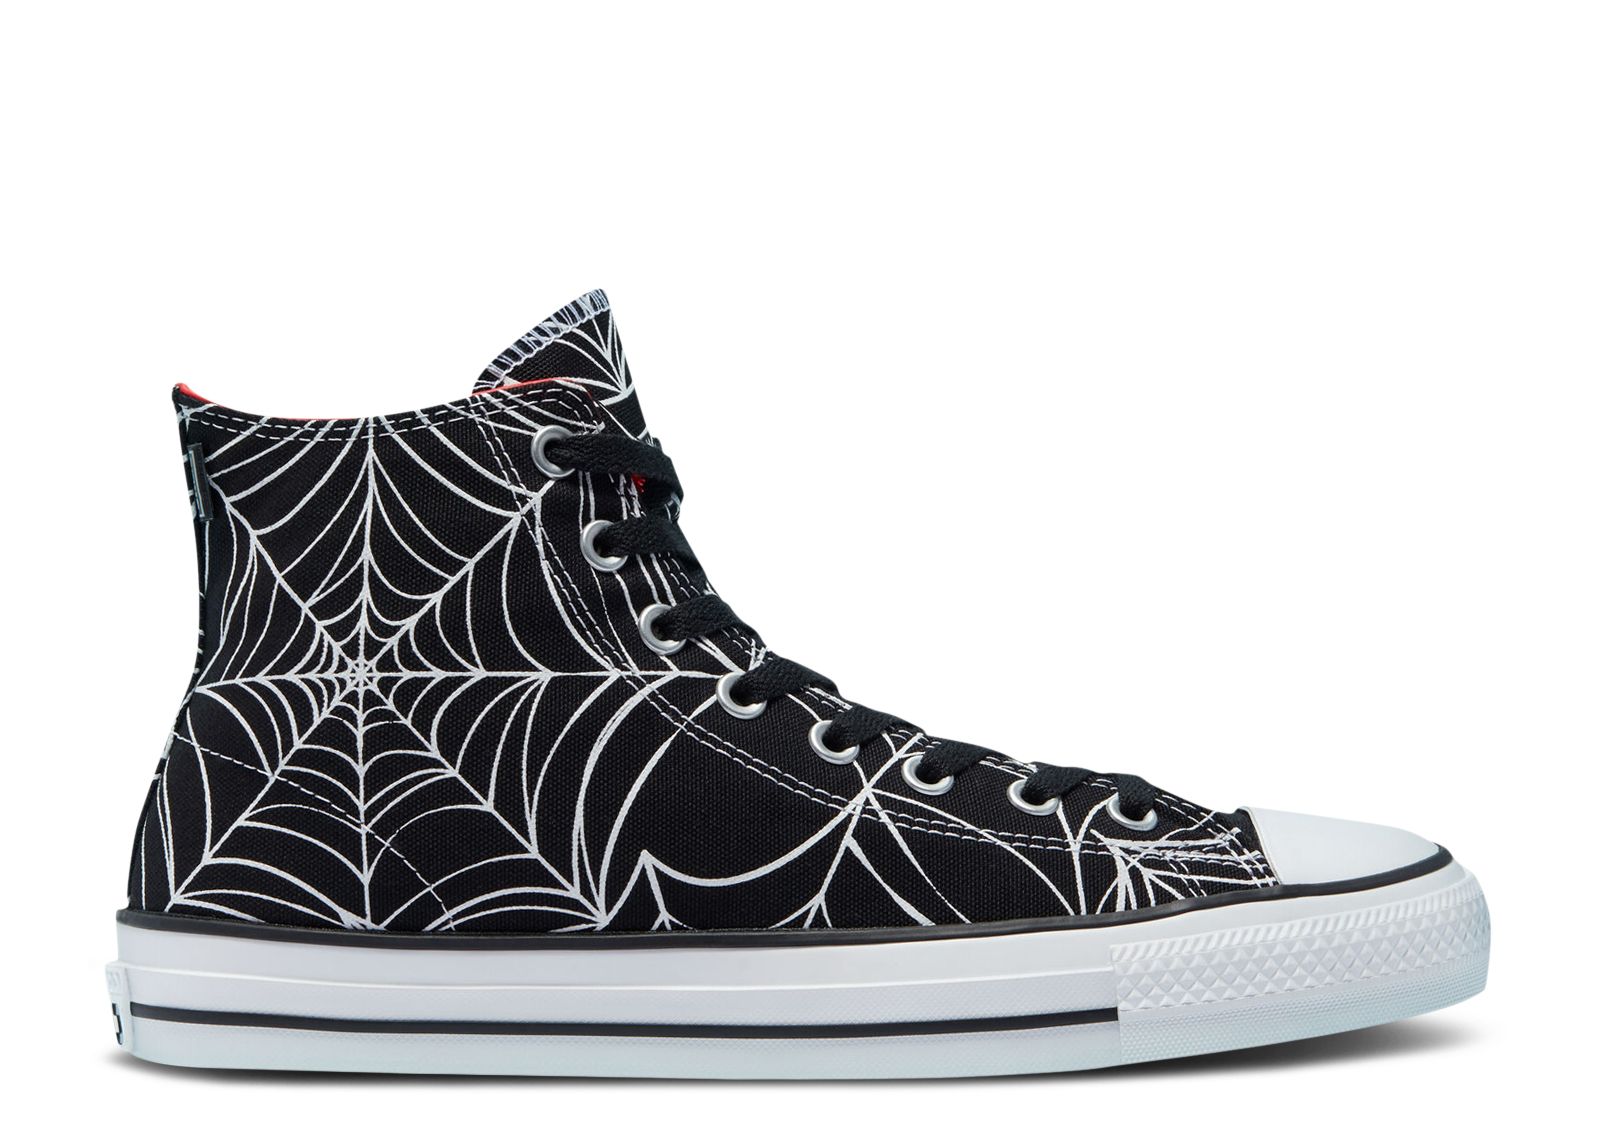 Chuck Taylor All Star Pro Low 'Webs And Spiders Black White' - Converse -  170938C - black/university red/white | Flight Club